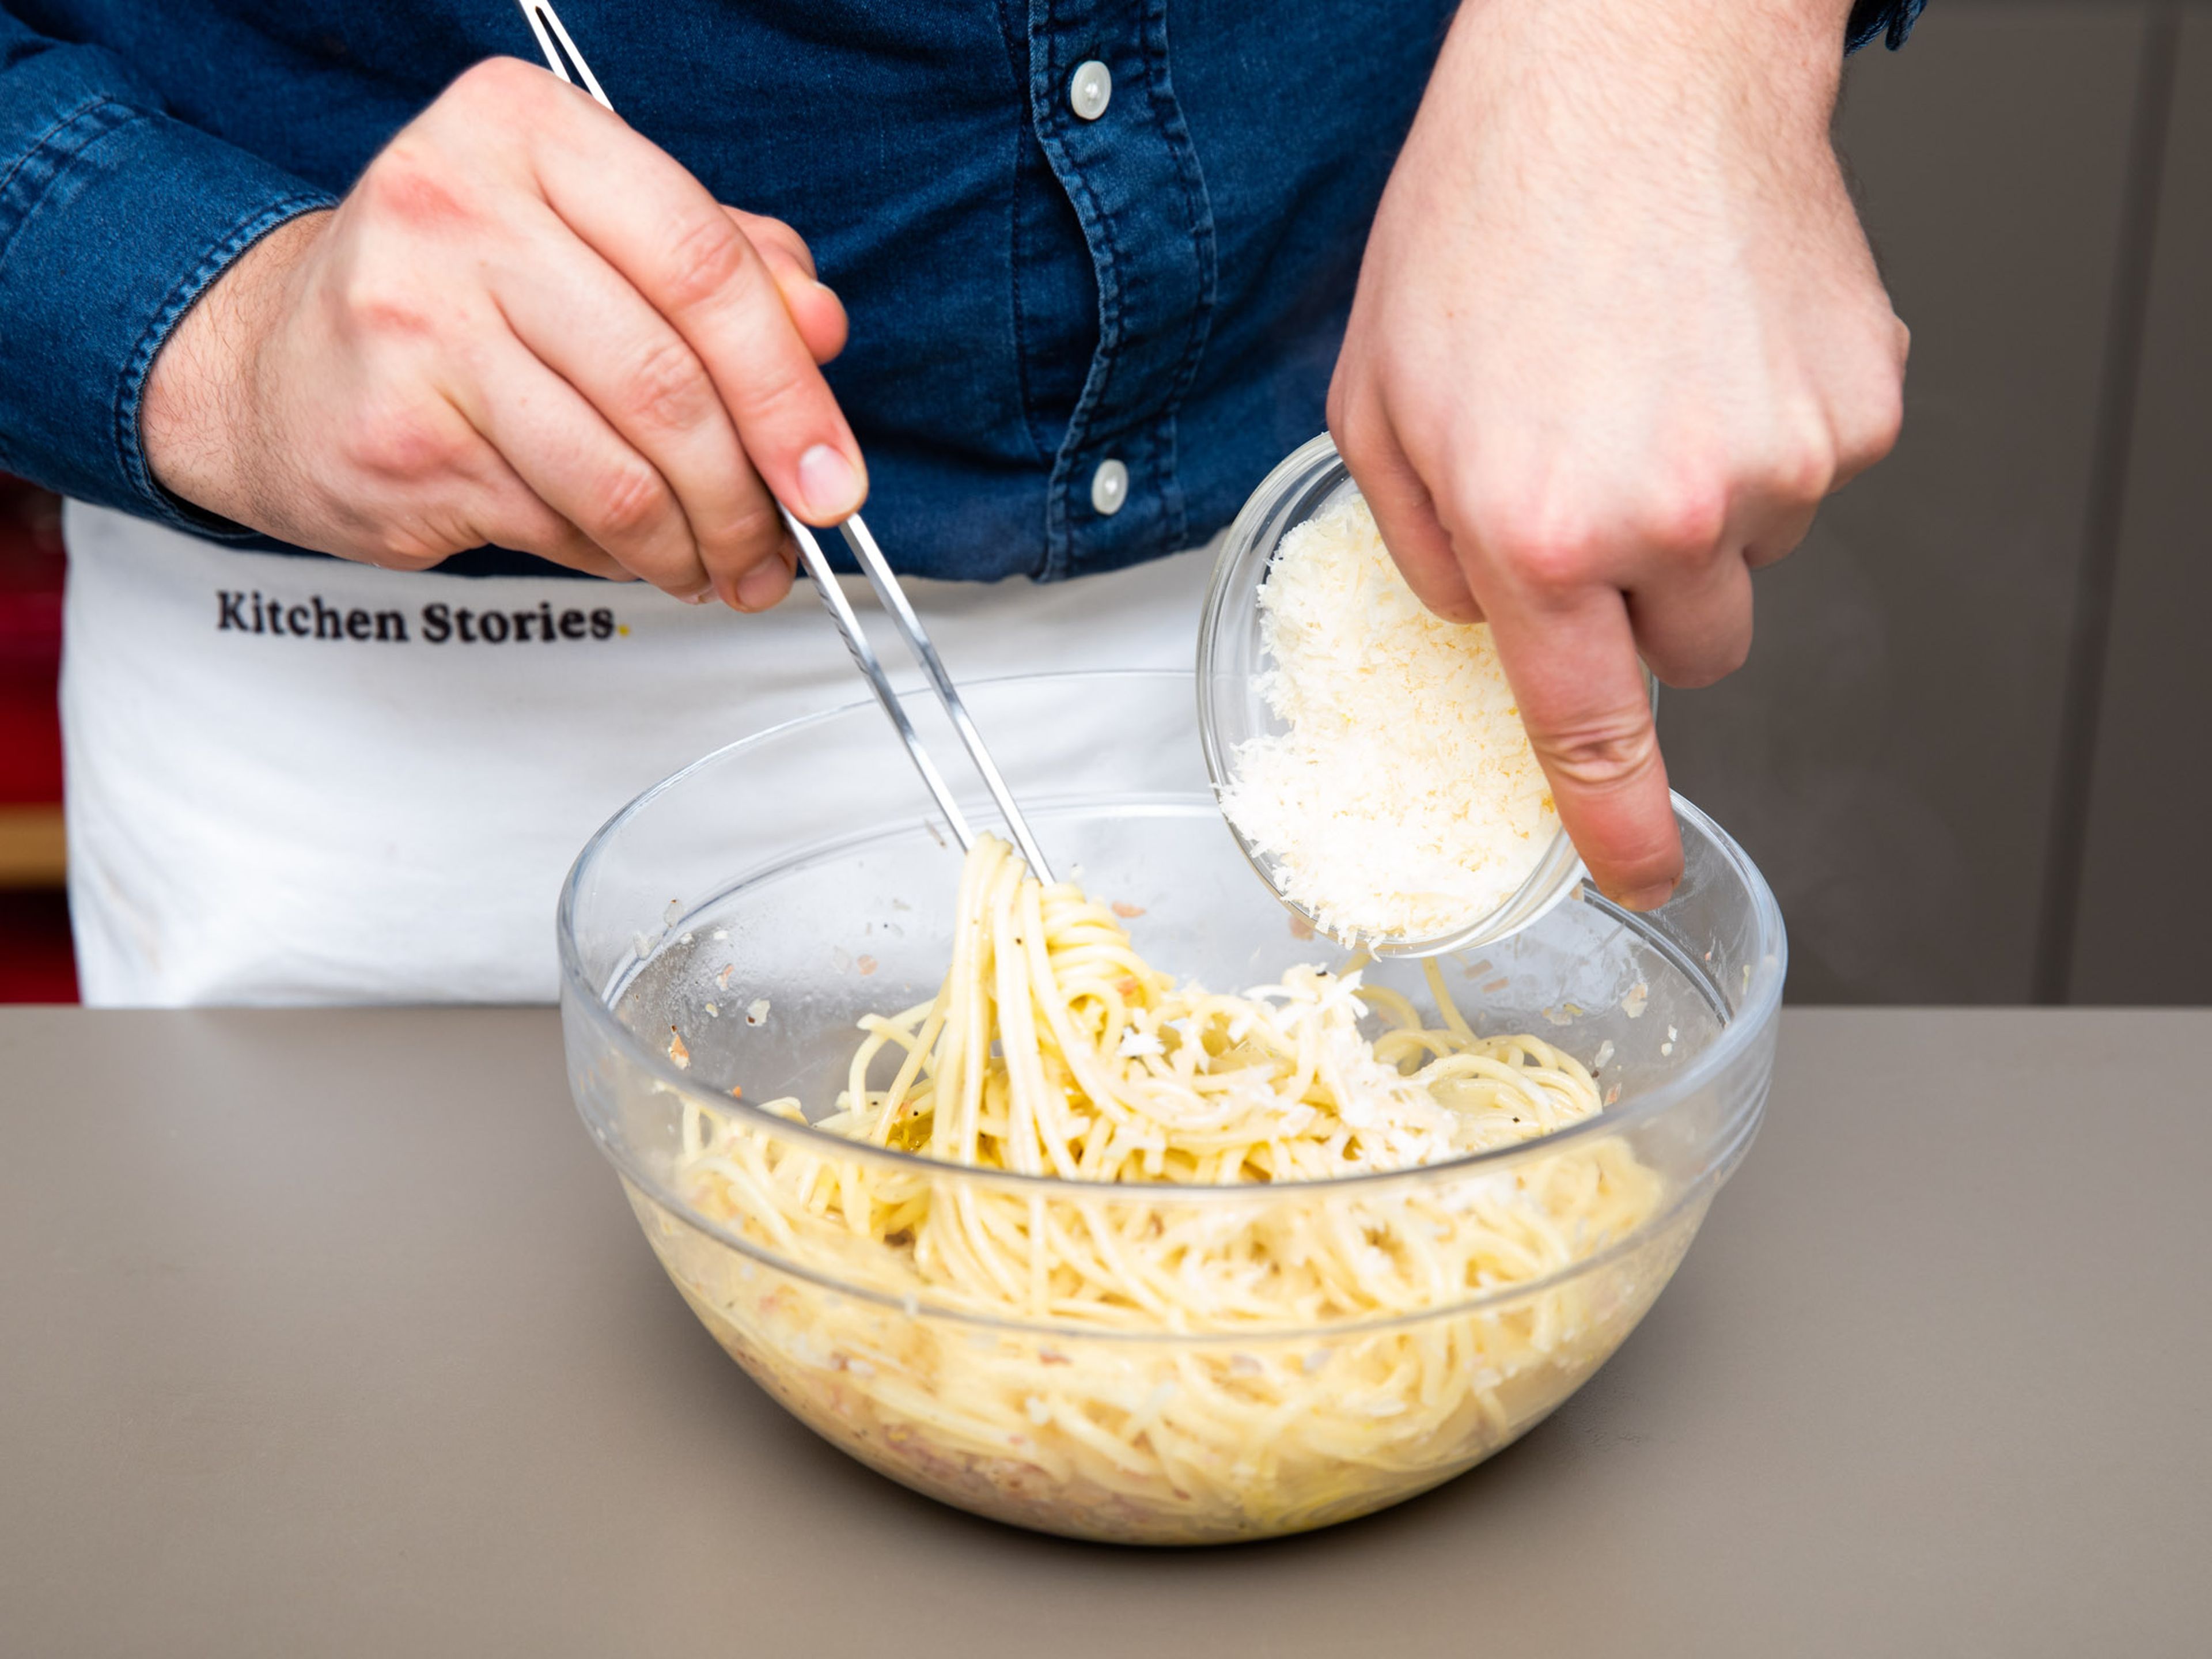 Transfer the pasta to the large bowl with the cheese and eggs. Toss well using tongs and a rubber spatula, adding more pasta water as needed to create a smooth, glossy sauce that coats the pasta. Add lemon juice and toss some more.